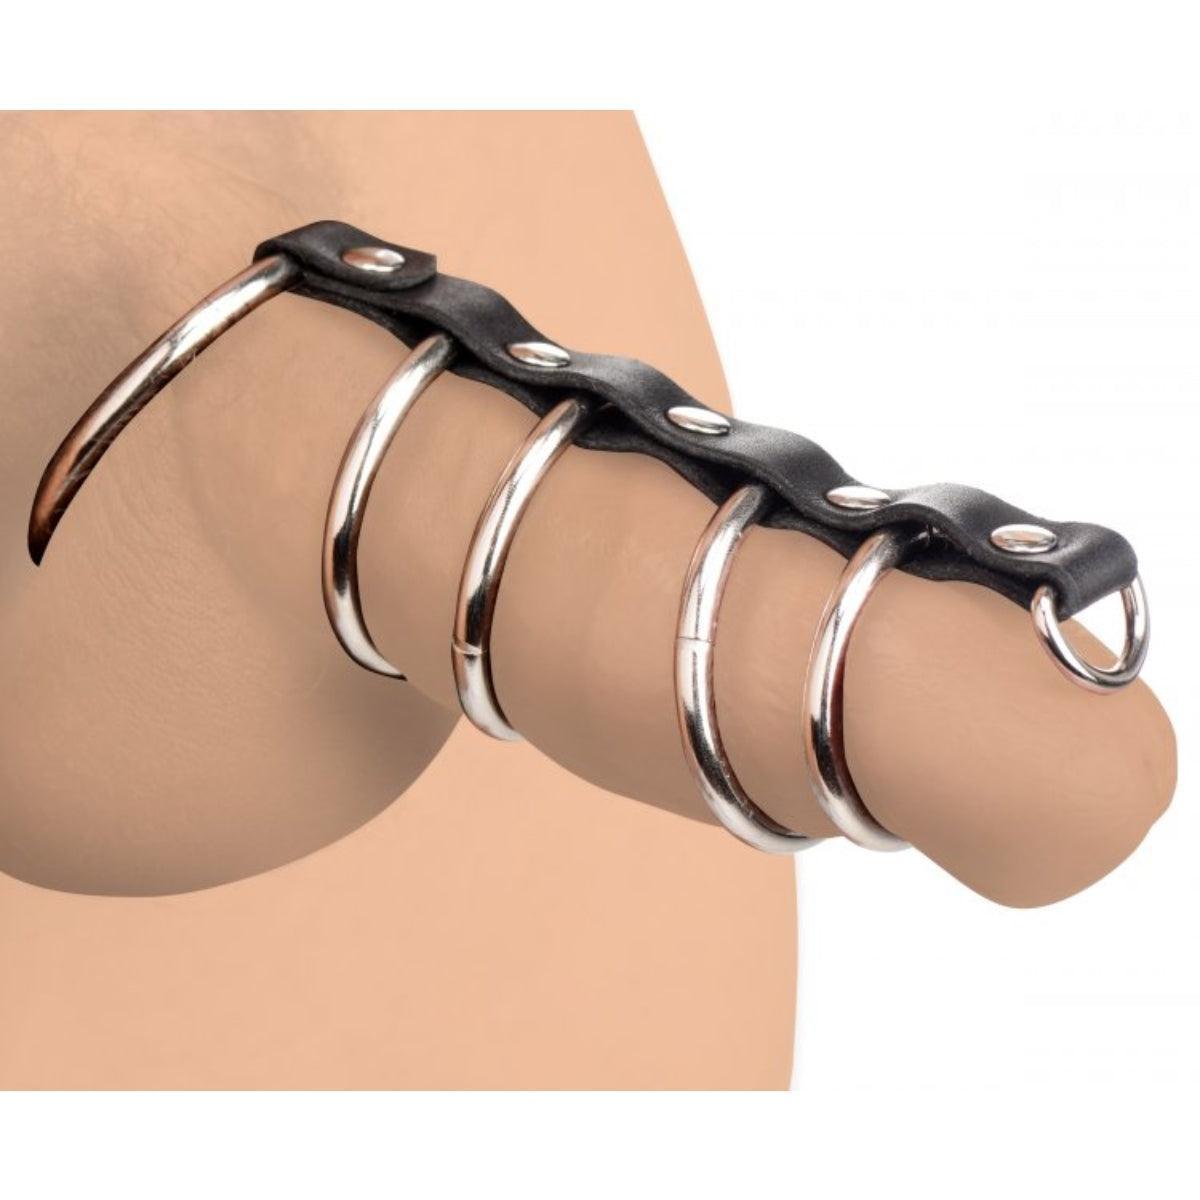 Strict Leather Cock Gear Gates Of Hell Leather Chastity Device